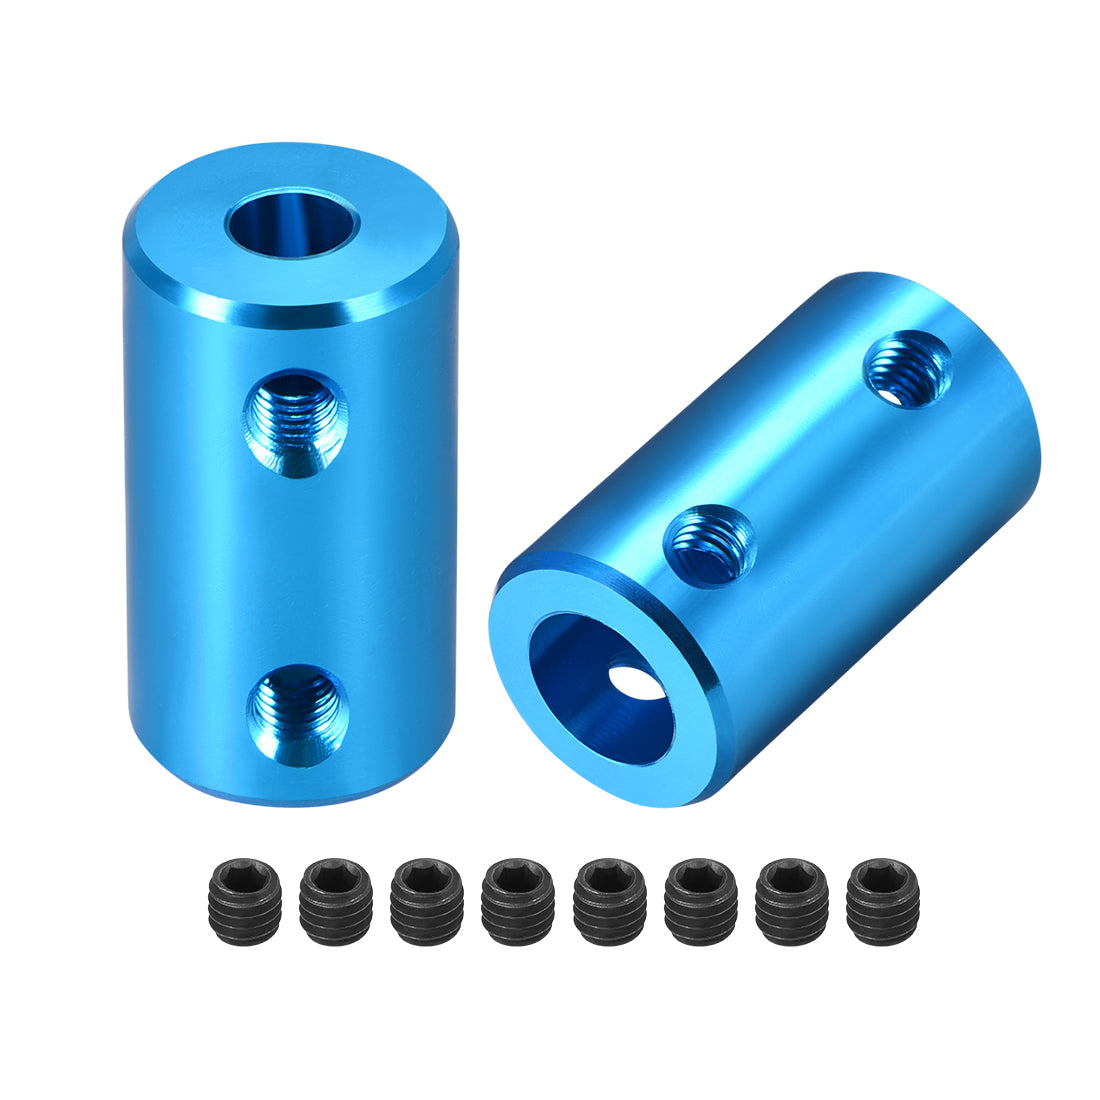 uxcell Uxcell Shaft Coupling 5mm to 8mm Bore L25xD14 Robot Motor Wheel Rigid Coupler Connector Blue 2 Pcs